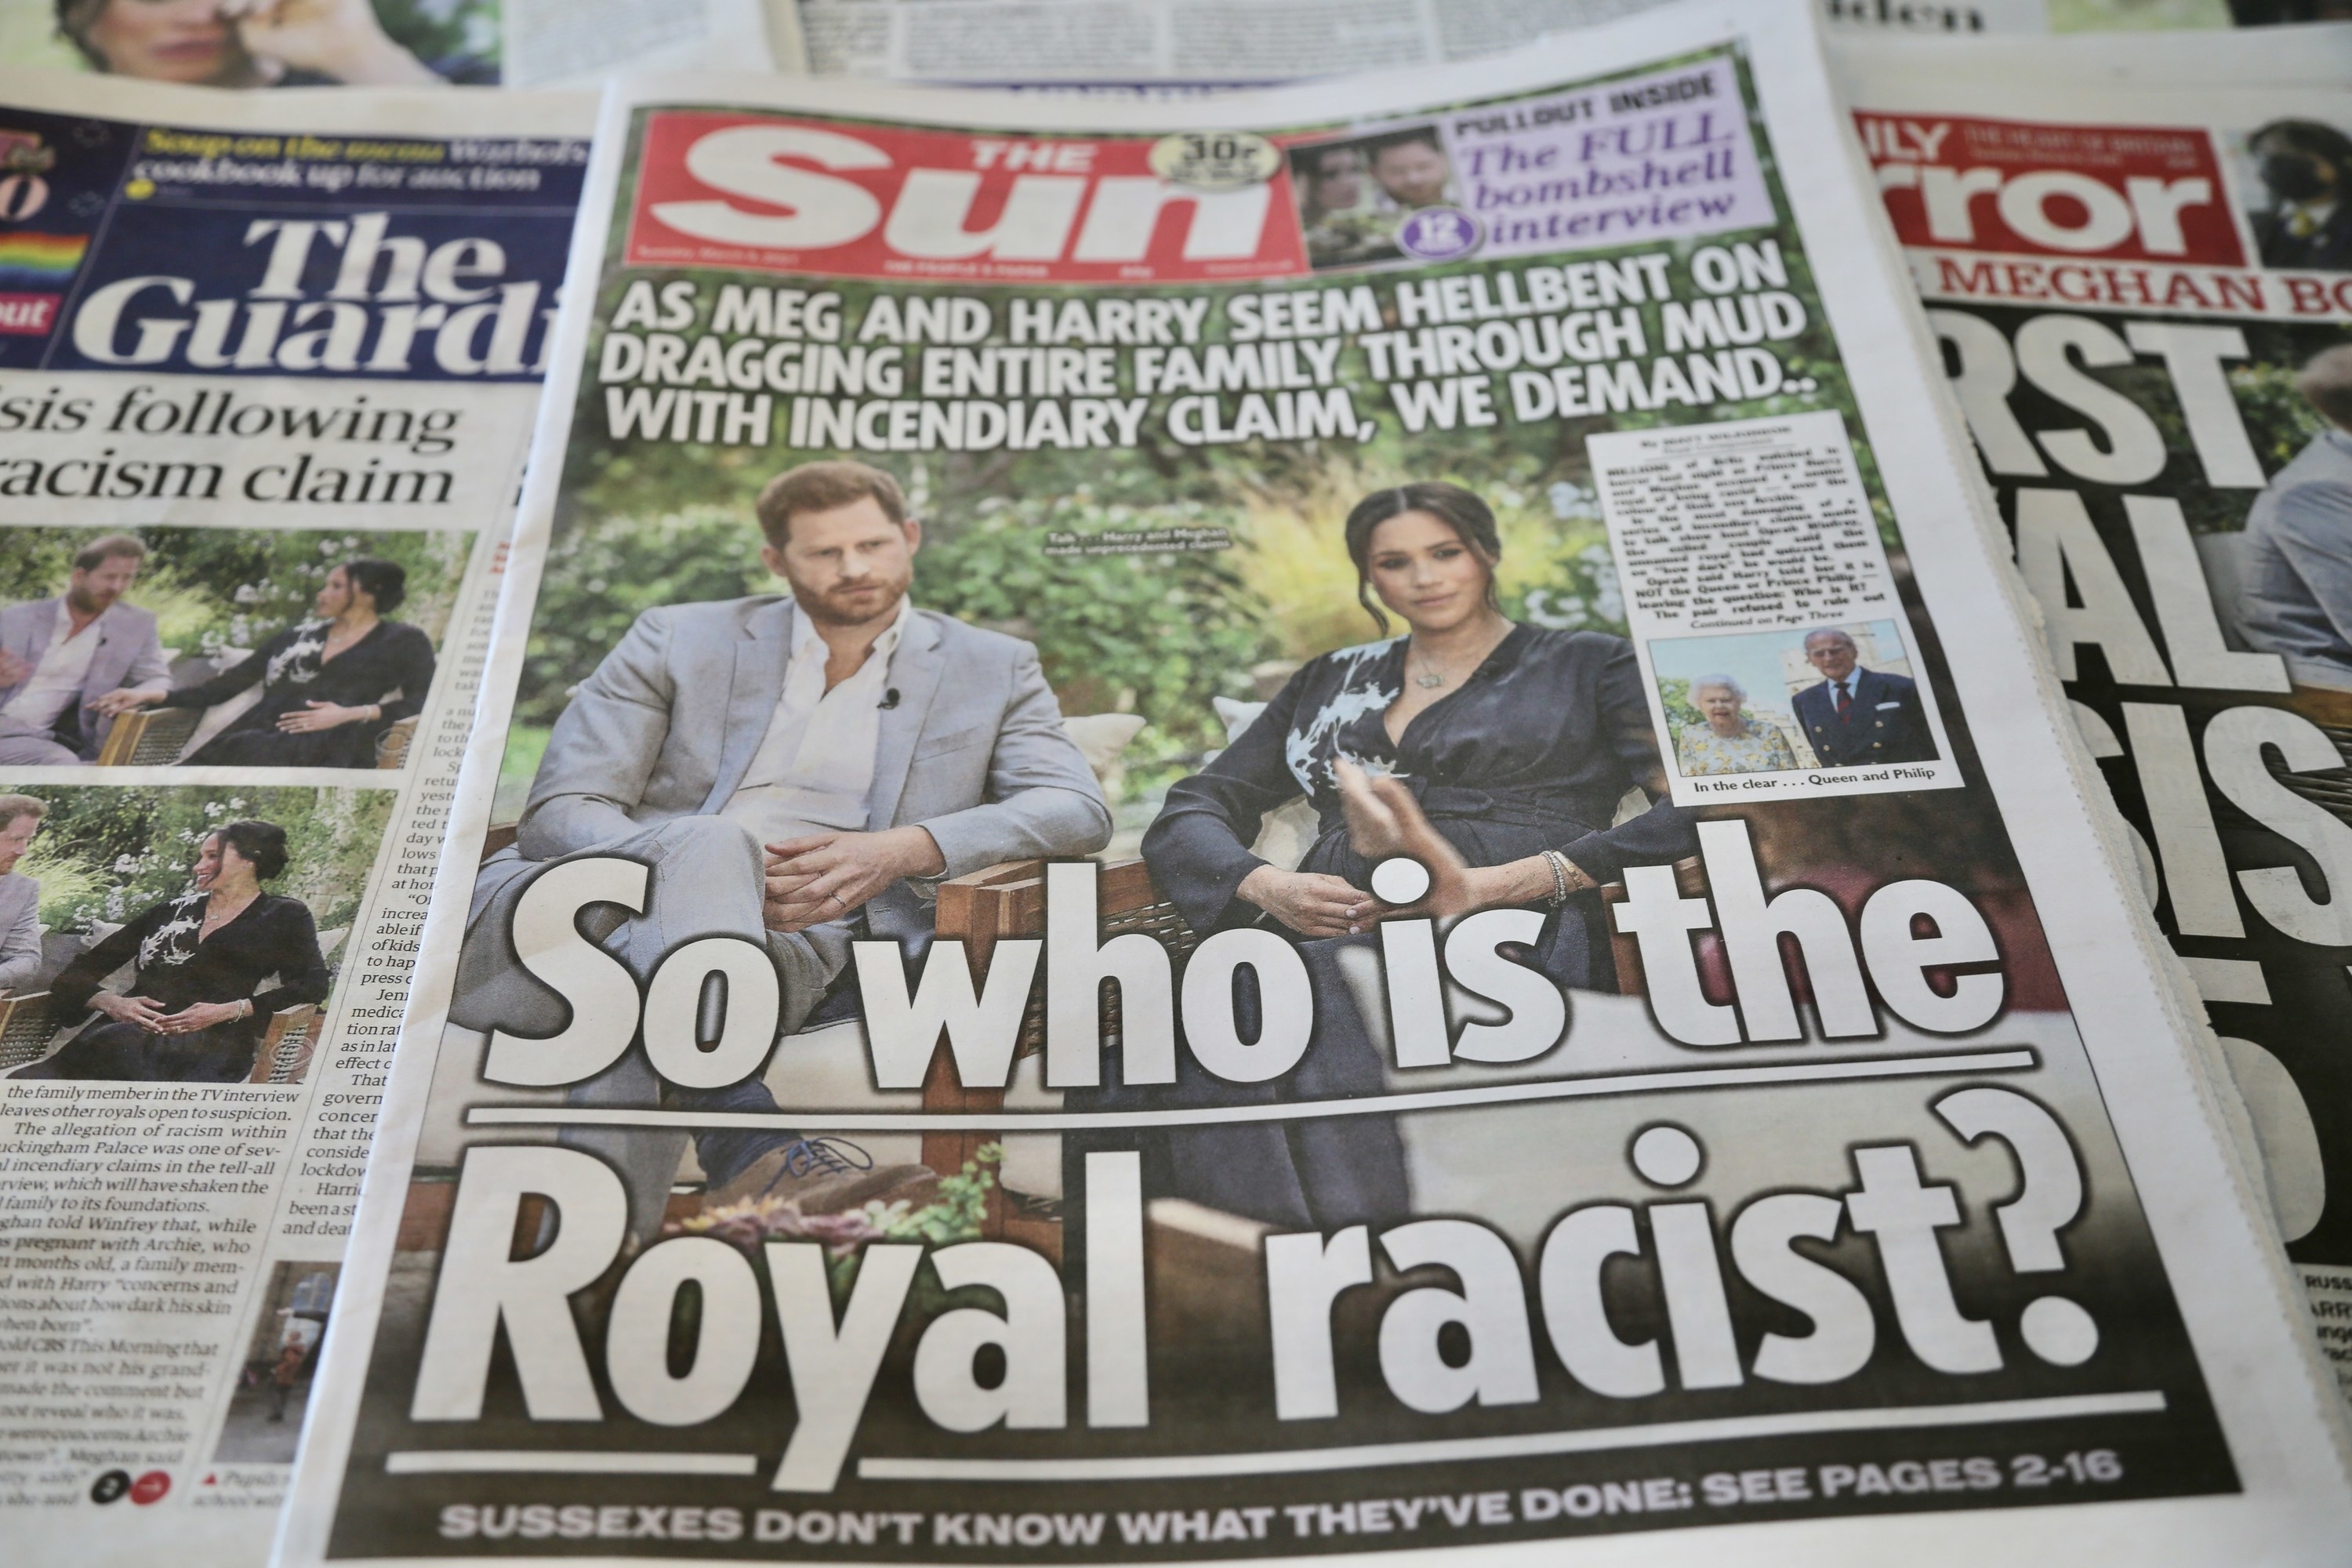 The front page of the Sun reads: &quot;So who is the Royal racist?&quot;